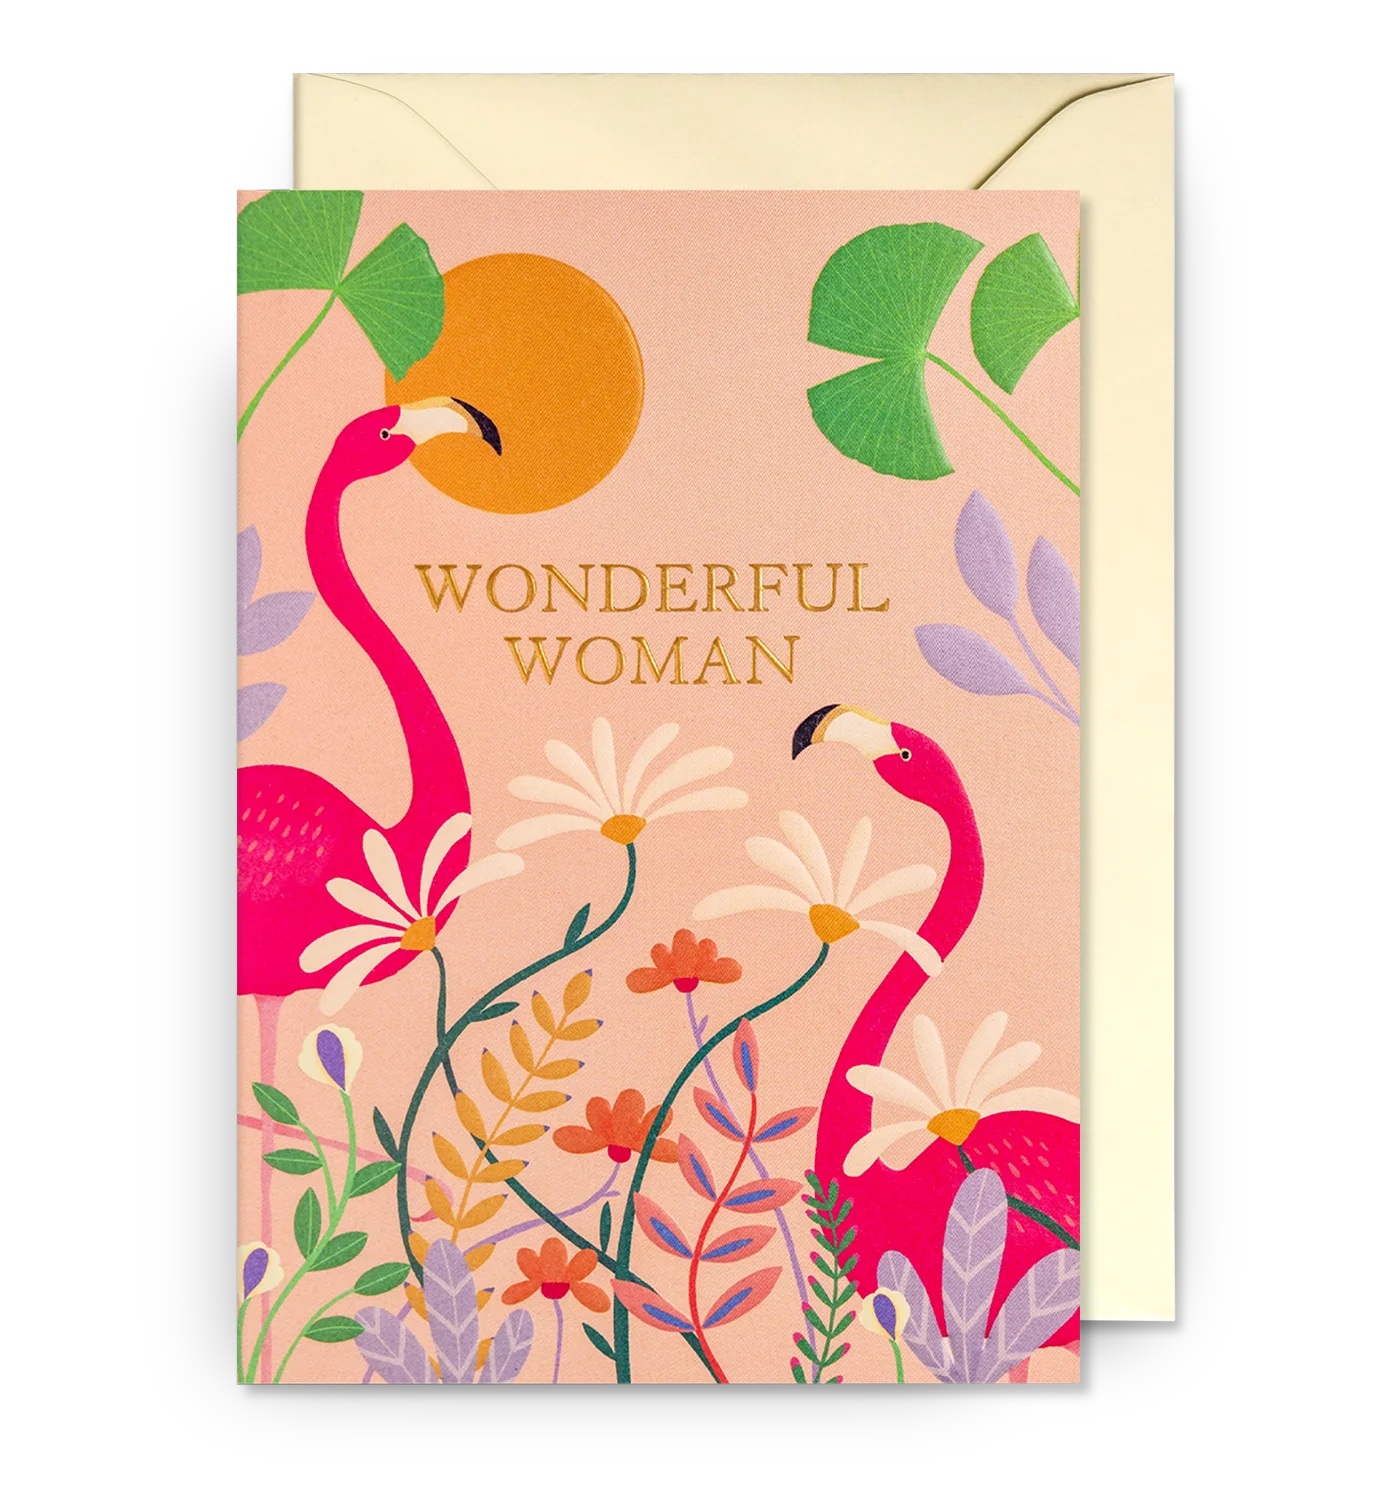 Wonderful Woman, 2 Flamingos in Field Love Card by Carrie May